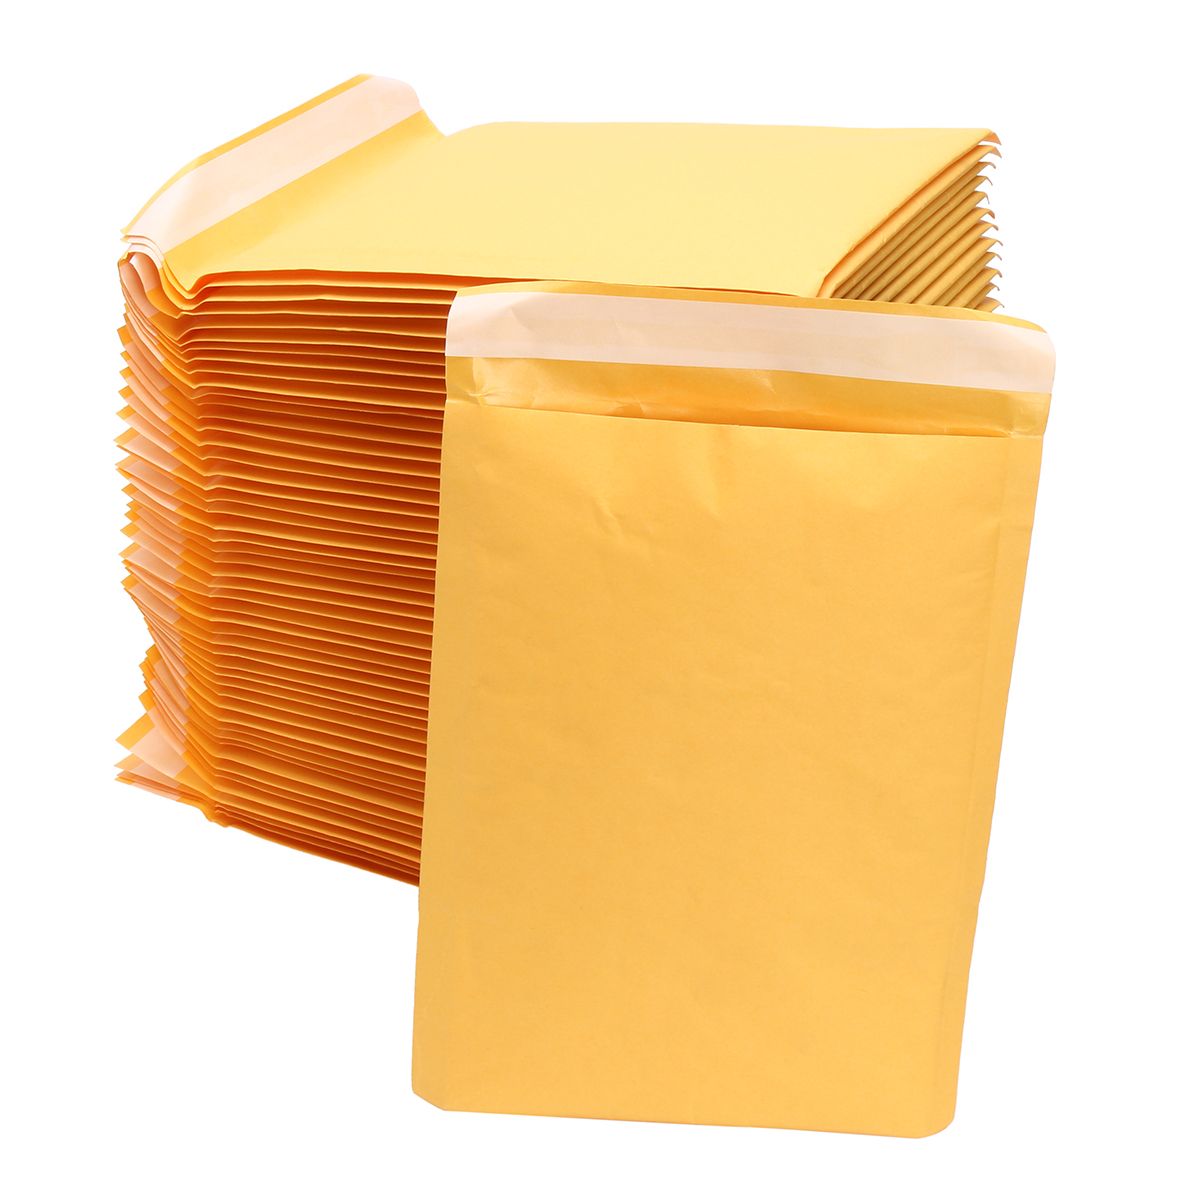 50Pcs-Kraft-Paper-Bubble-Mailers-Padded-Envelopes-Self-Seal-Shipping-Bags-Lot-Yellow-1419541